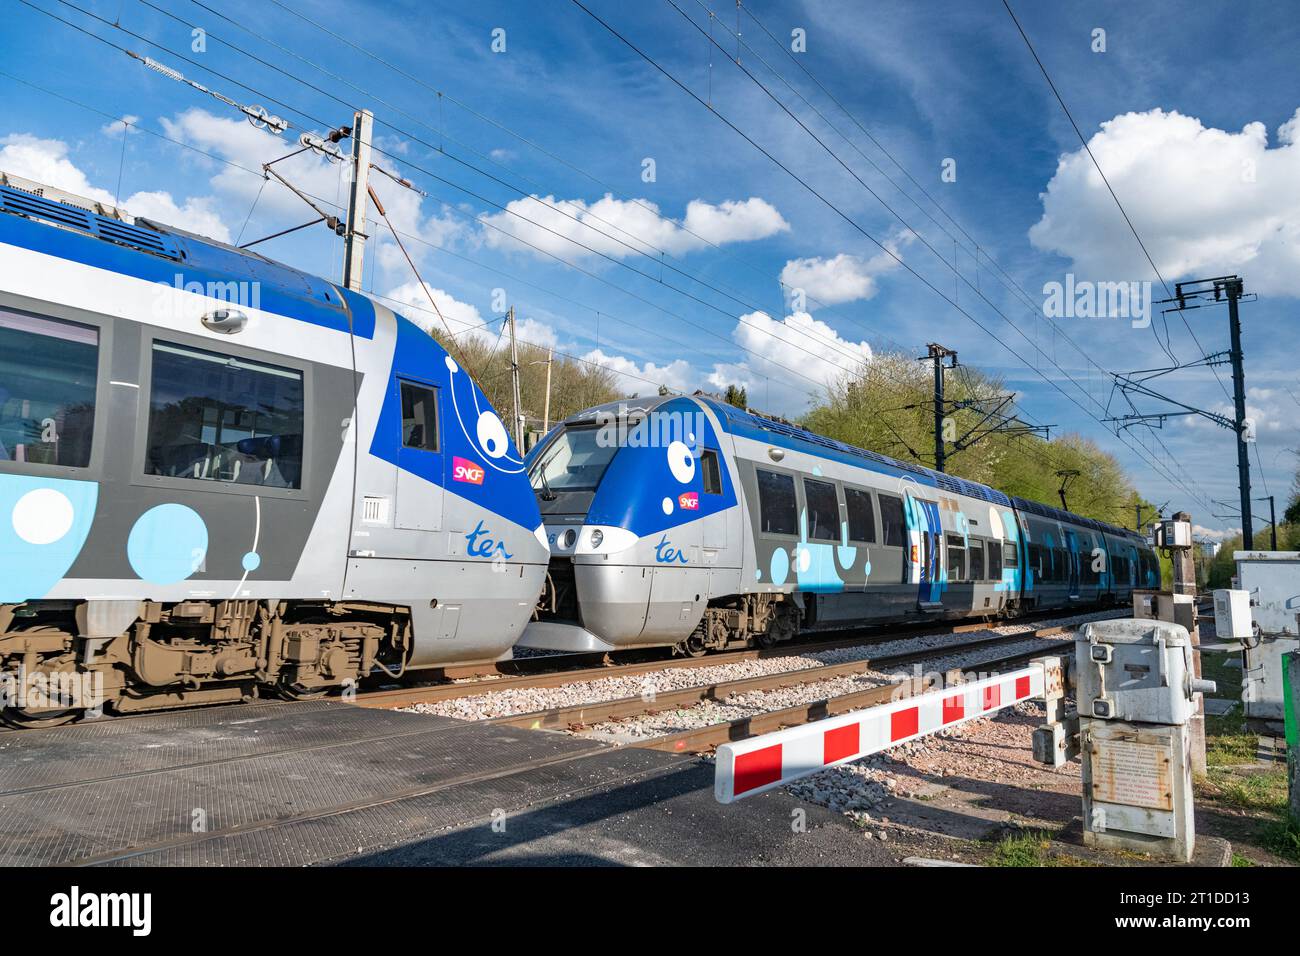 TER local train passing through a level crossing, railway linking Paris, Rouen and Le Havre, in Normandy, Le Houlme. Stock Photo